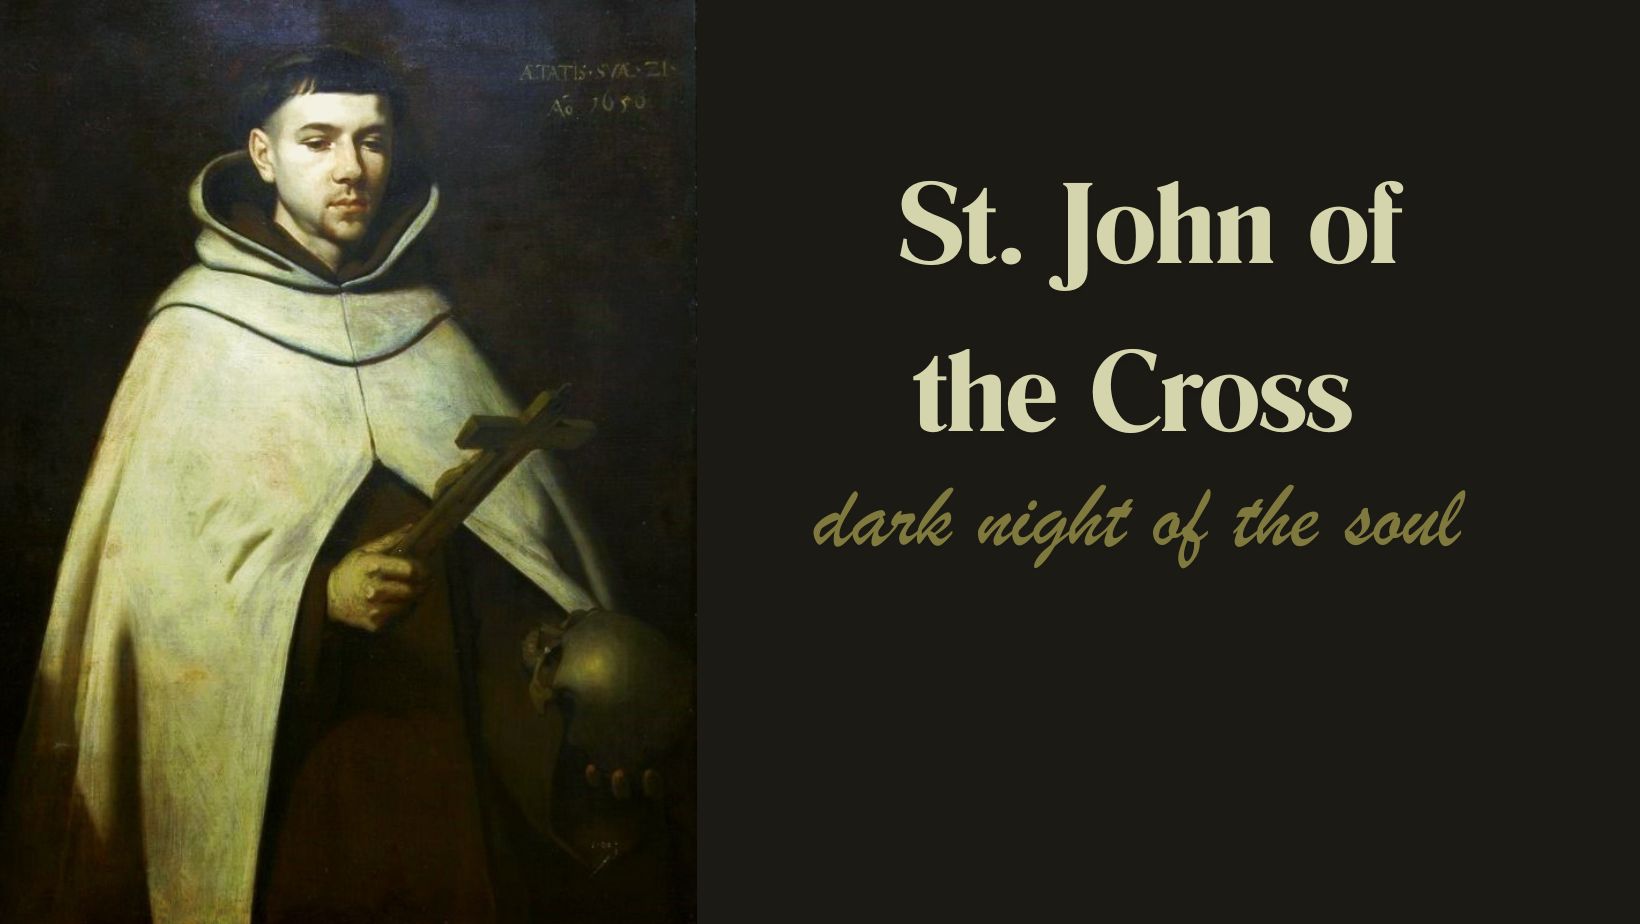 How does St. John of the Cross guide us through the Dark Night of